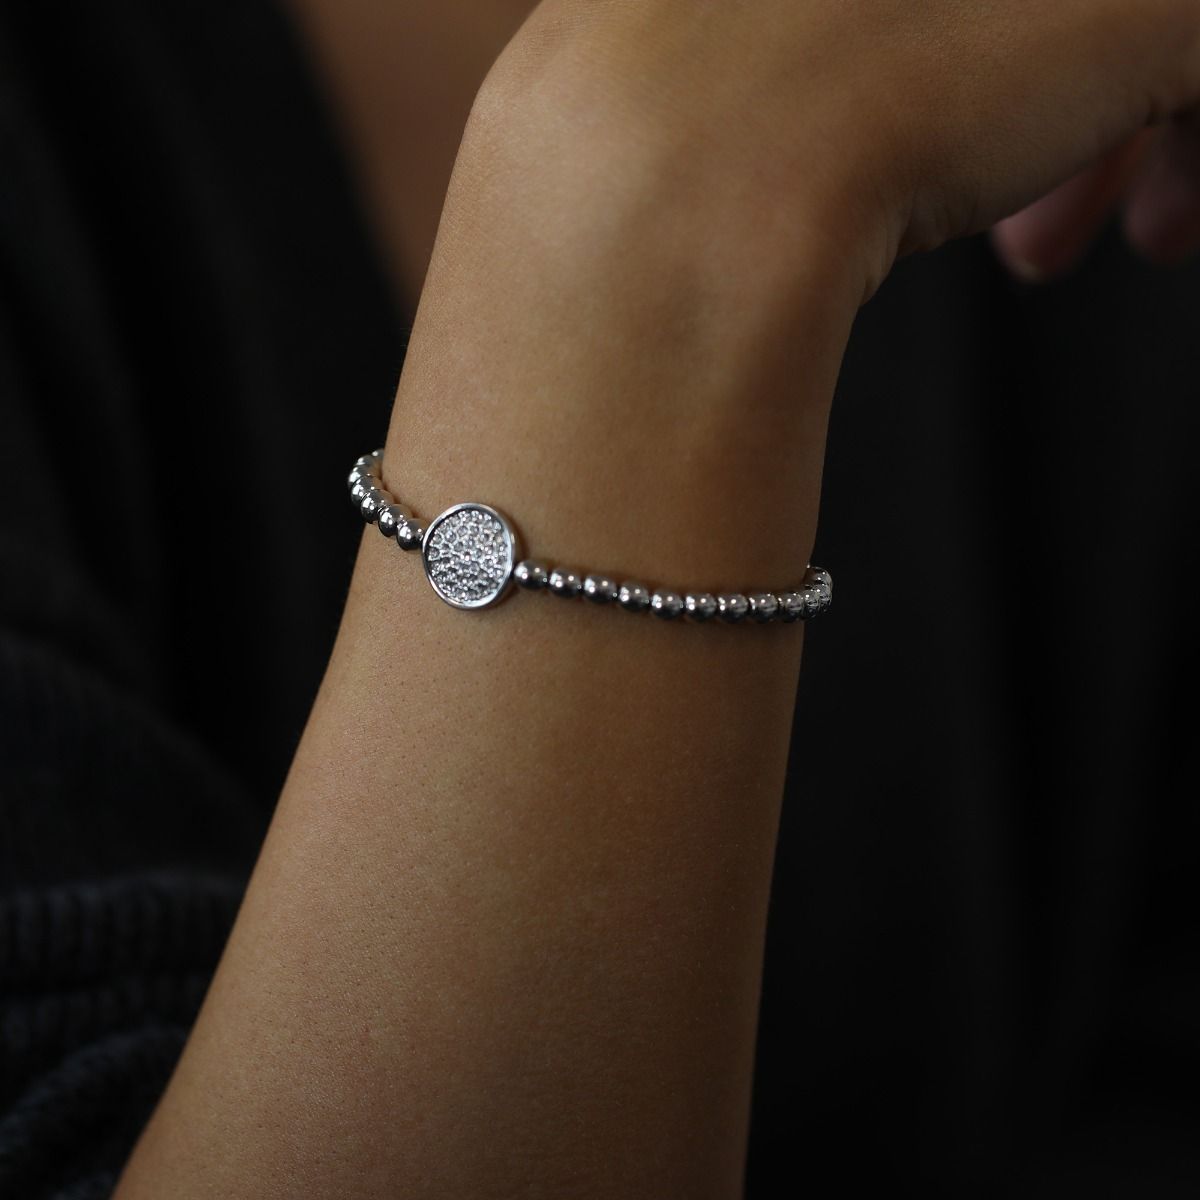 This stylish beaded friendship bracelet features a sparkling pave disc, adding a touch of elegance to its vibrant design. Handcrafted with care, it embodies the spirit of unity and connection.